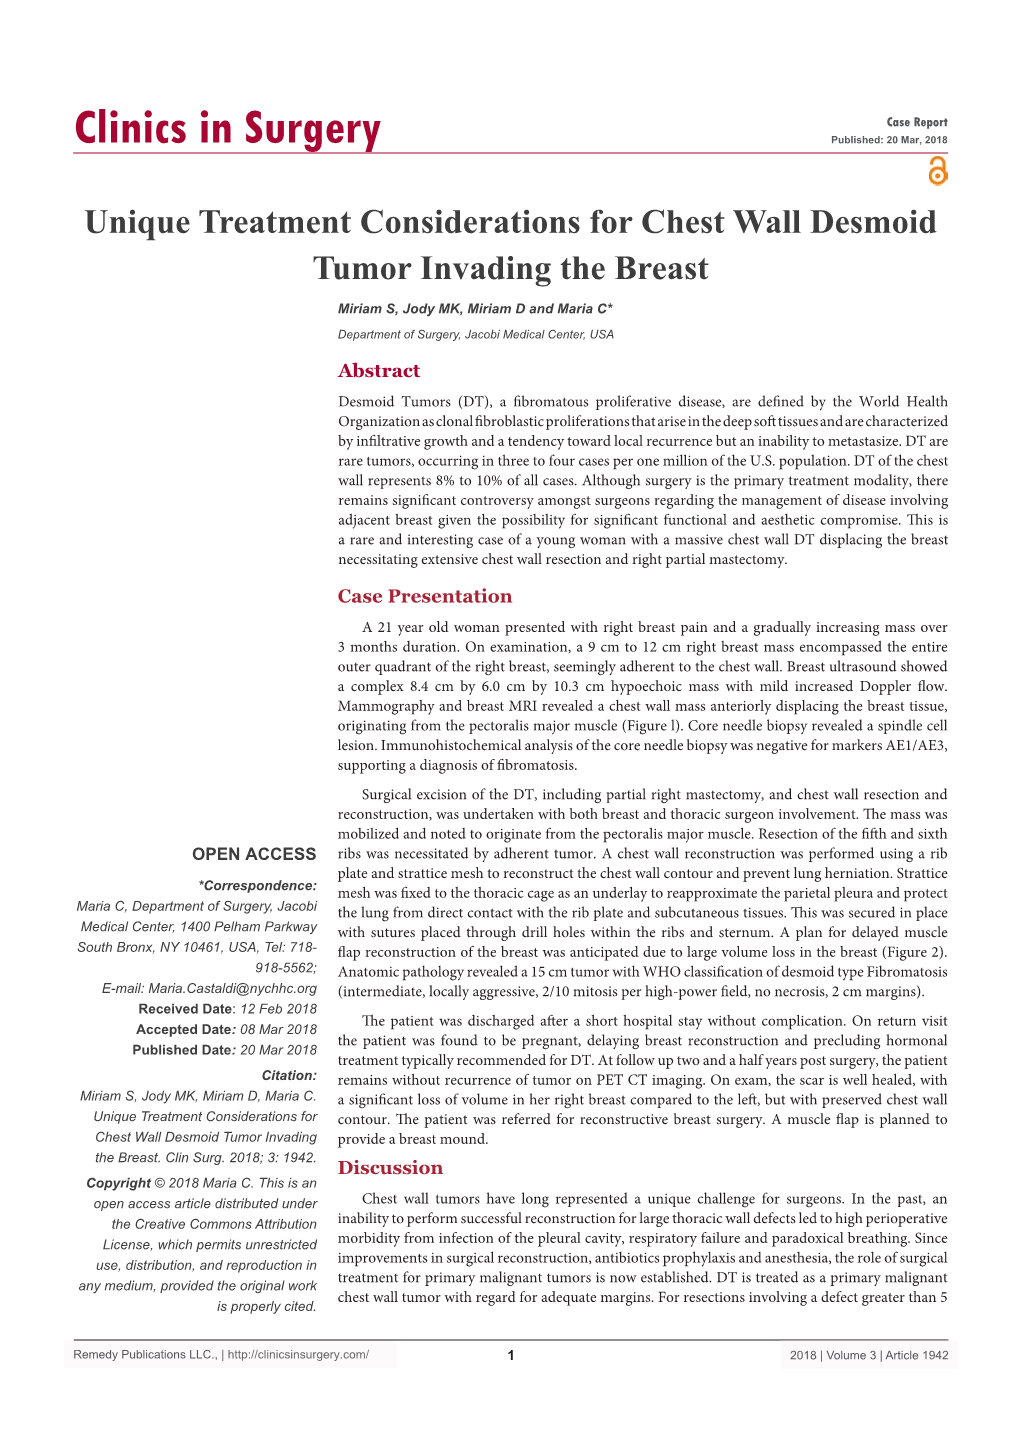 Unique Treatment Considerations for Chest Wall Desmoid Tumor Invading the Breast